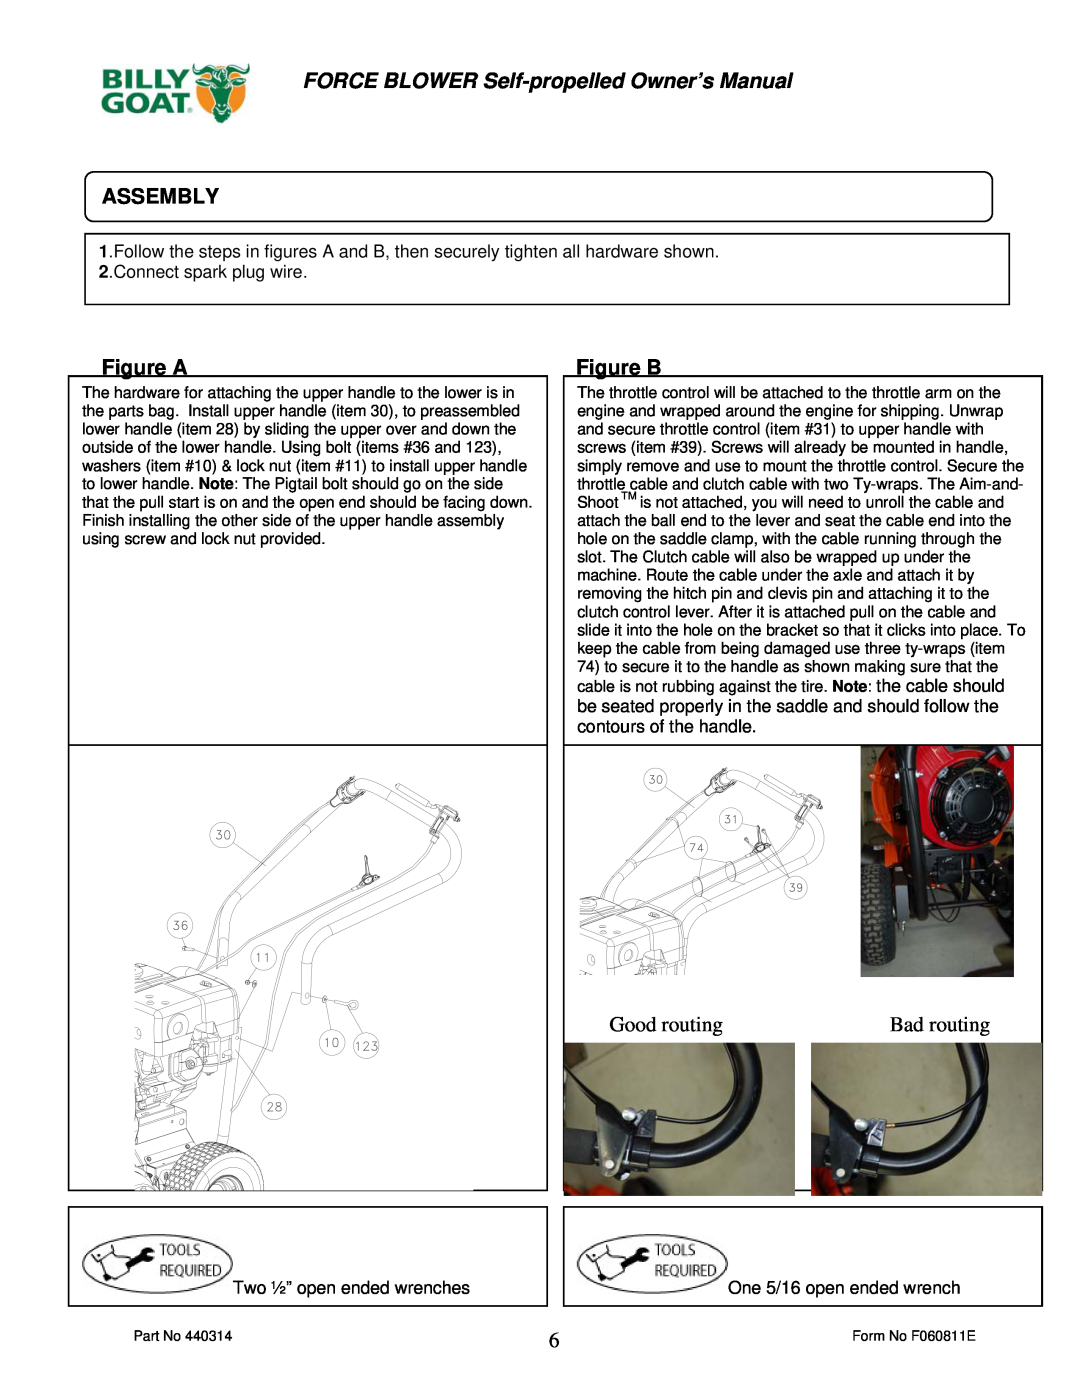 Billy Goat F1302SPH, F902SPS, F902SPH, F1802SPV owner manual Assembly, Figure A, Figure B, Good routing, Bad routing 